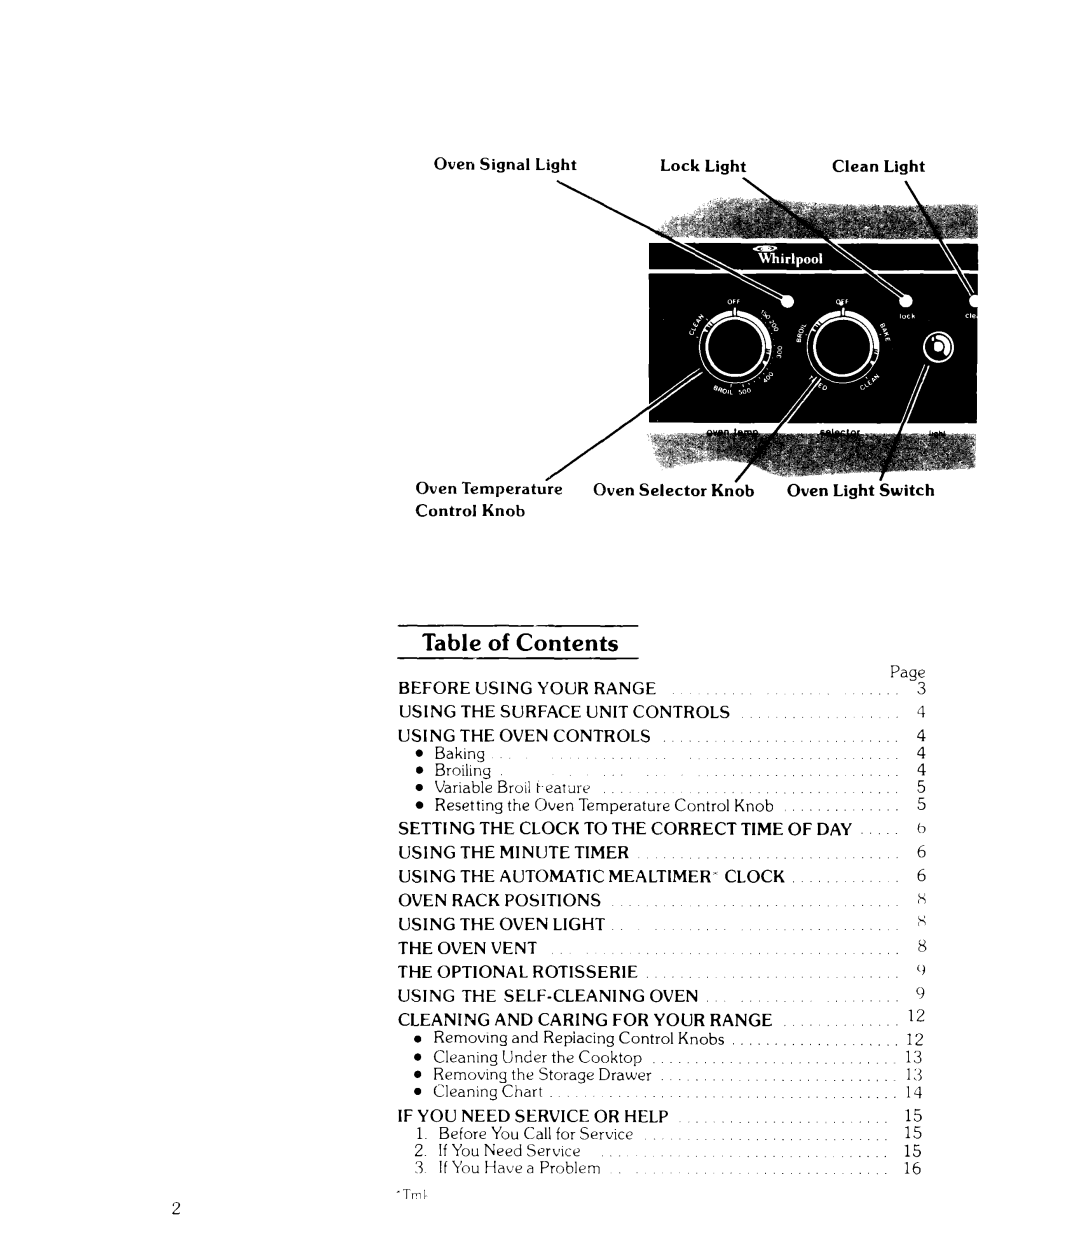 Whirlpool RJE-3700, RJE-3750 manual Table of Contents 